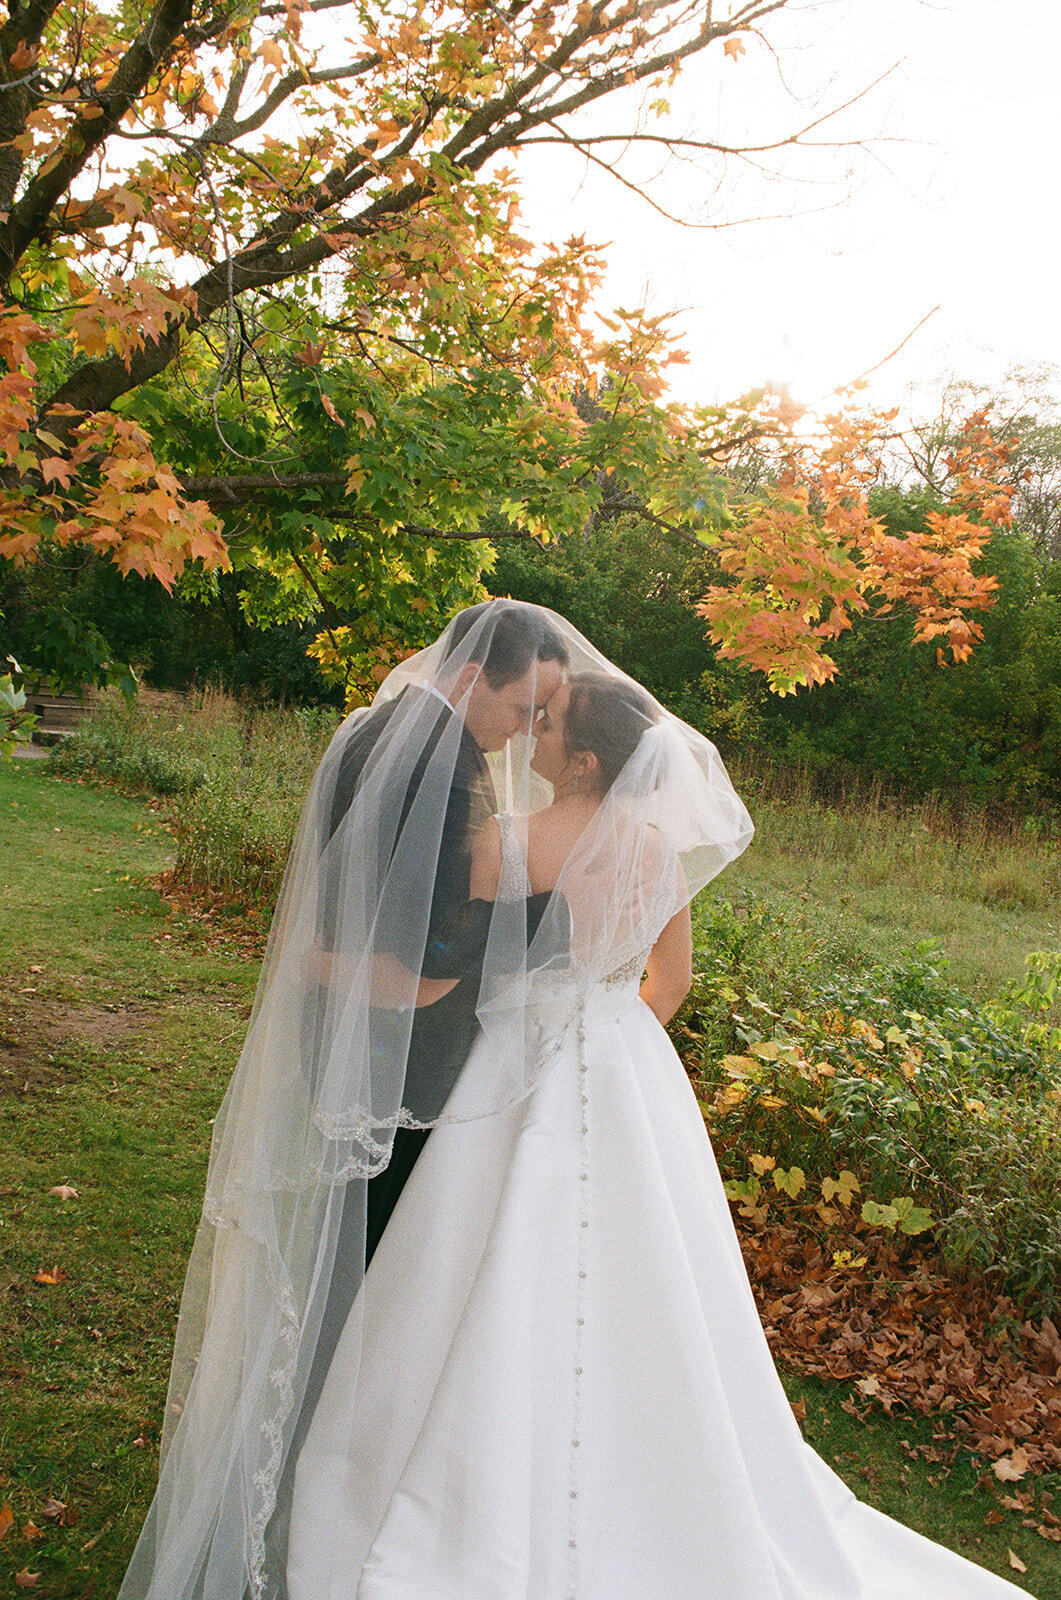 Bride and groom under a veil under an orange fall tree.